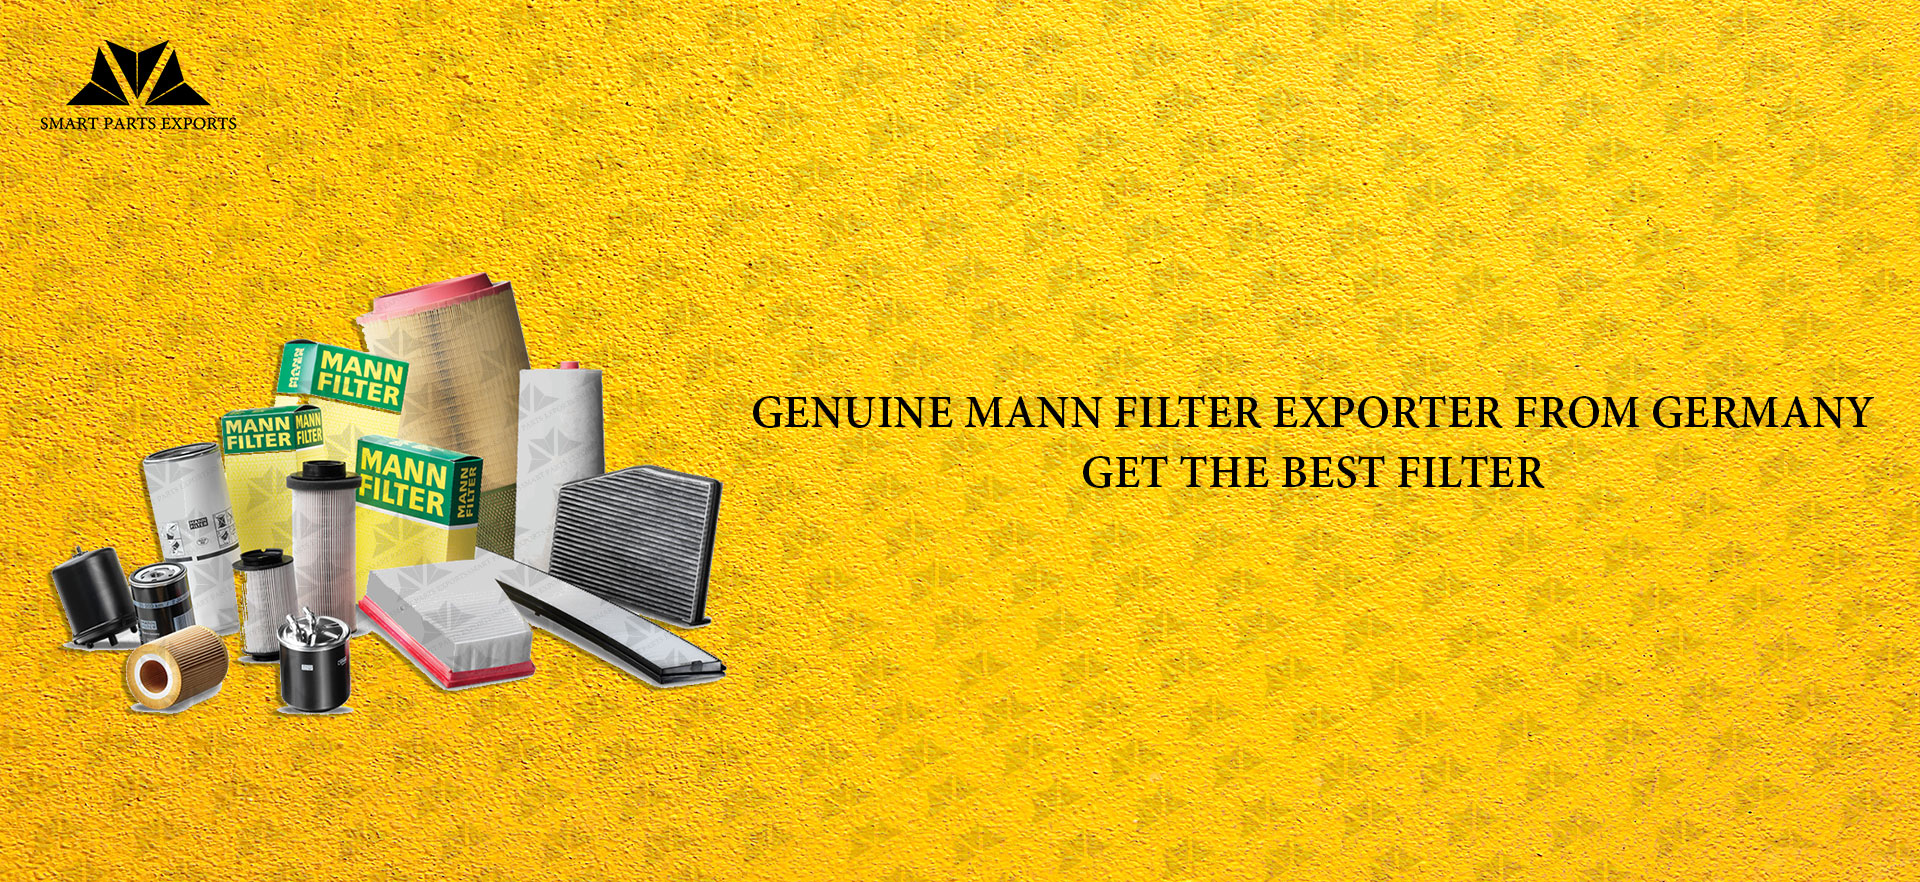 Genuine Mann Filter Exporter from Germany | Get the Best Filter